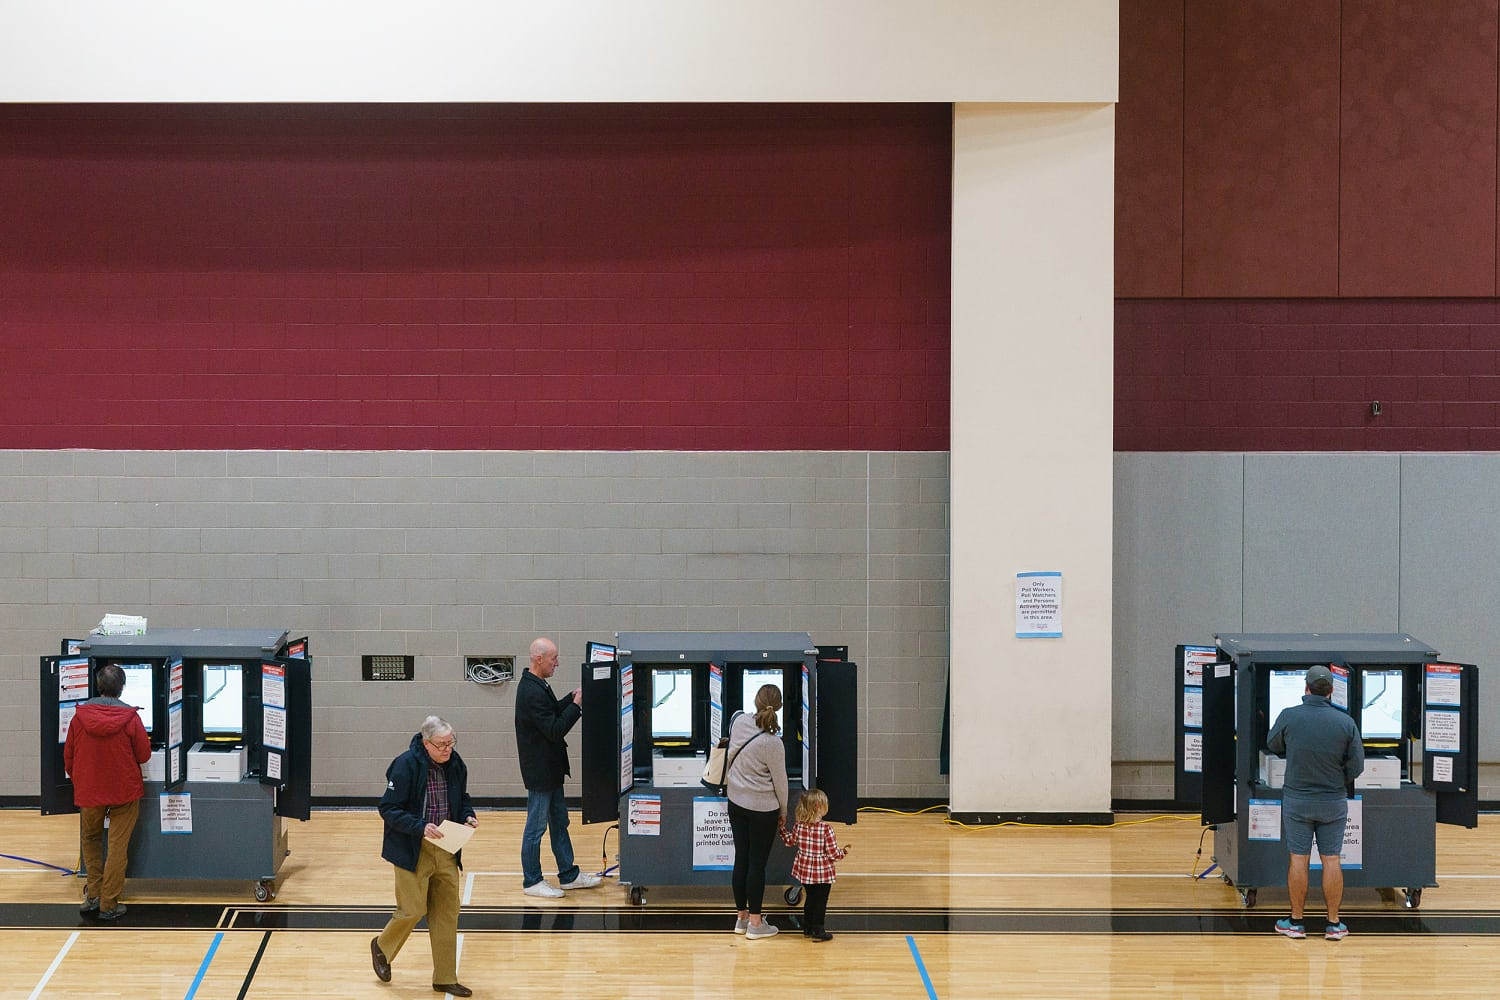 Georgia's controversial electronic voting machines face their biggest test yet